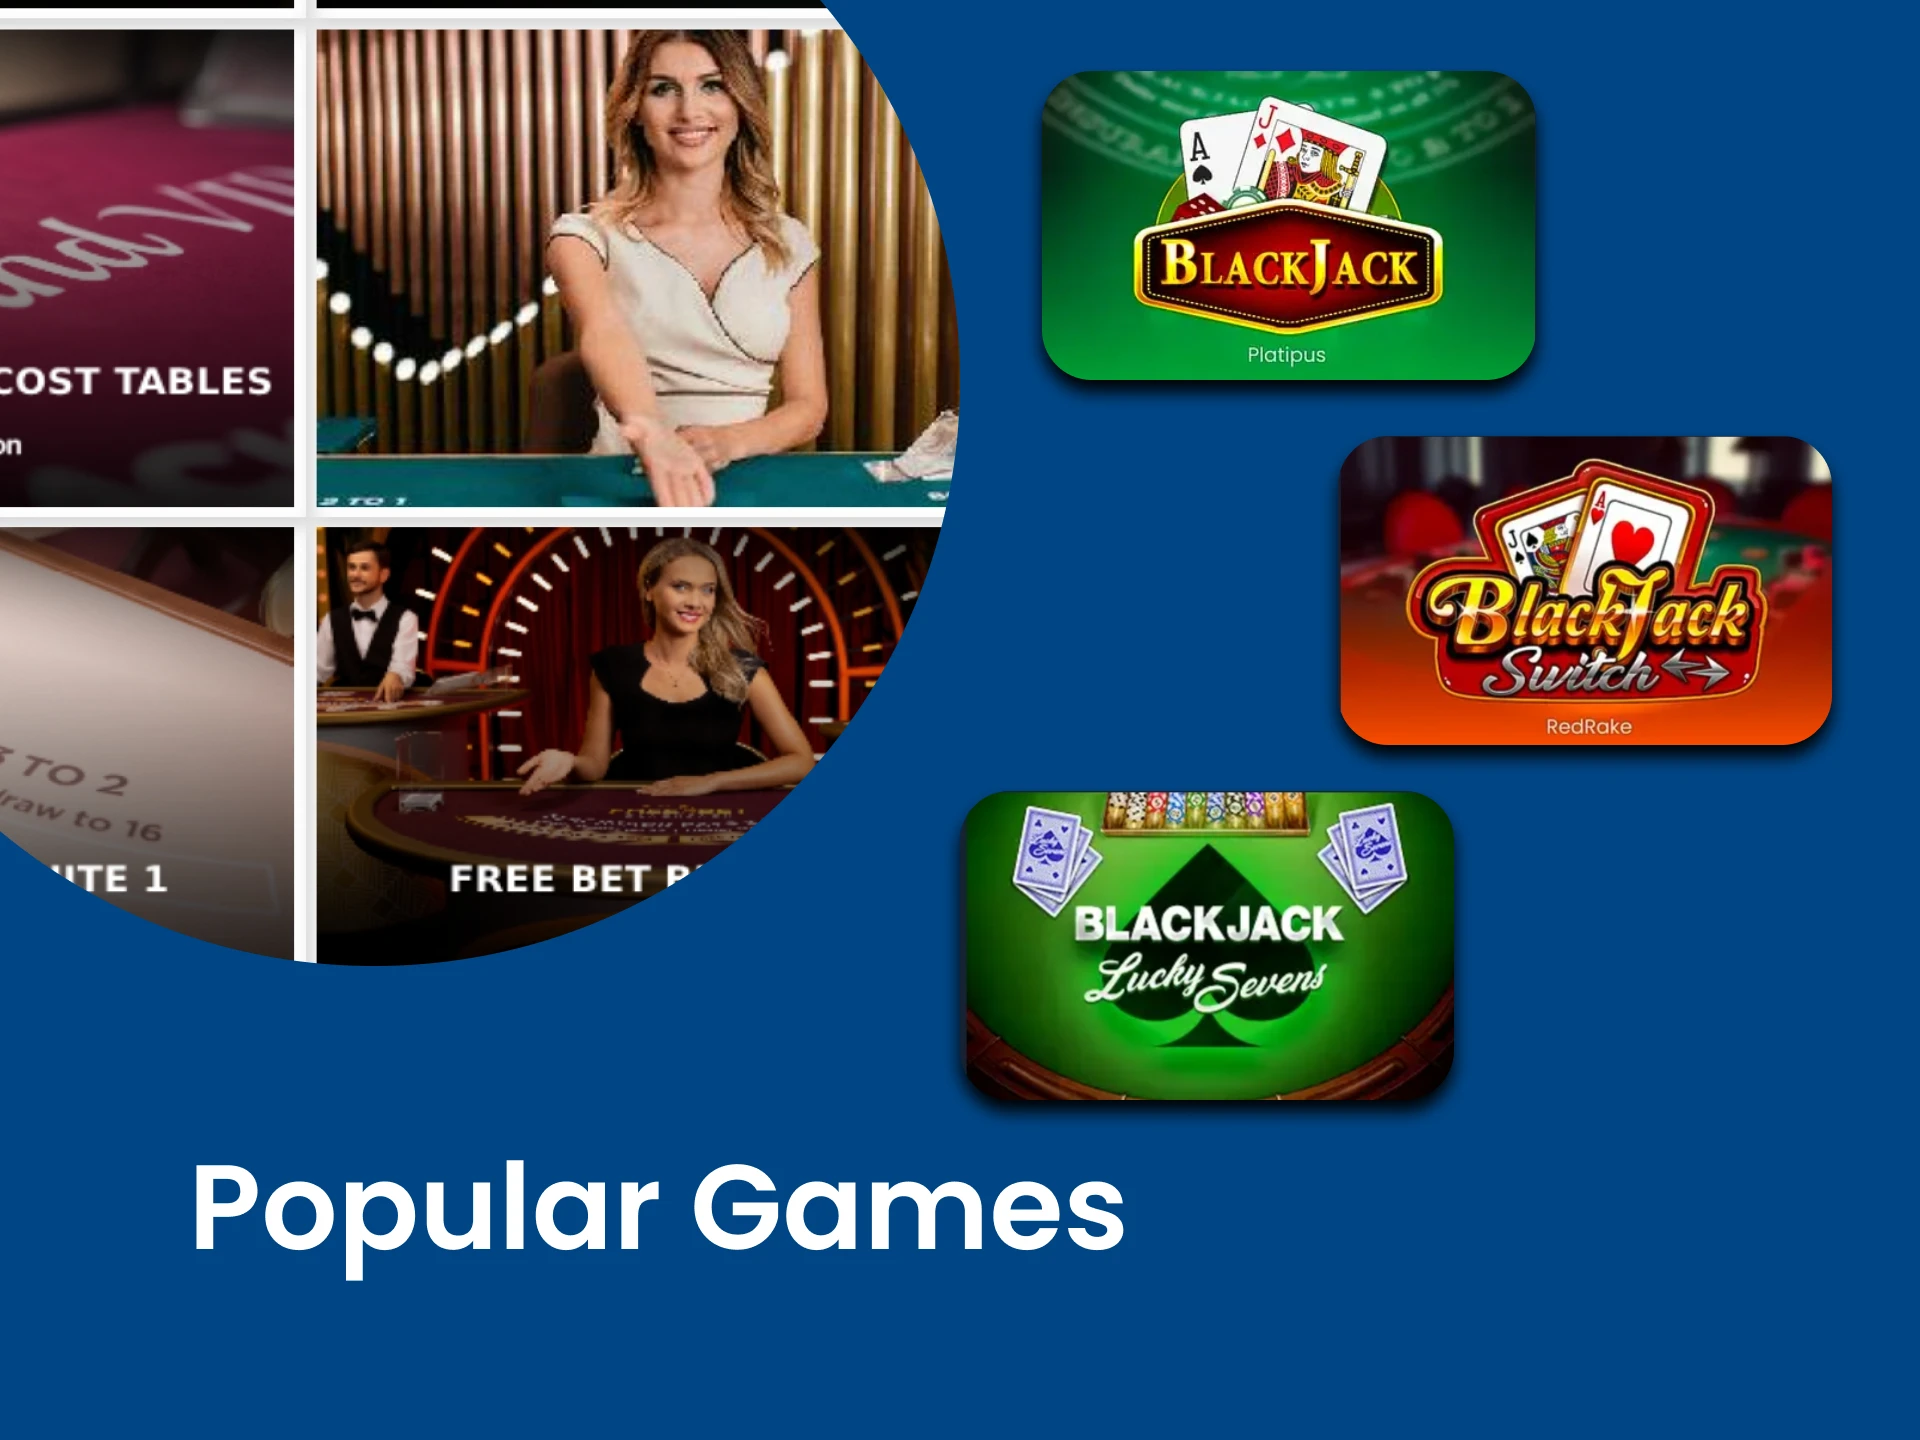 We will tell you about the most popular games in BlackJack.